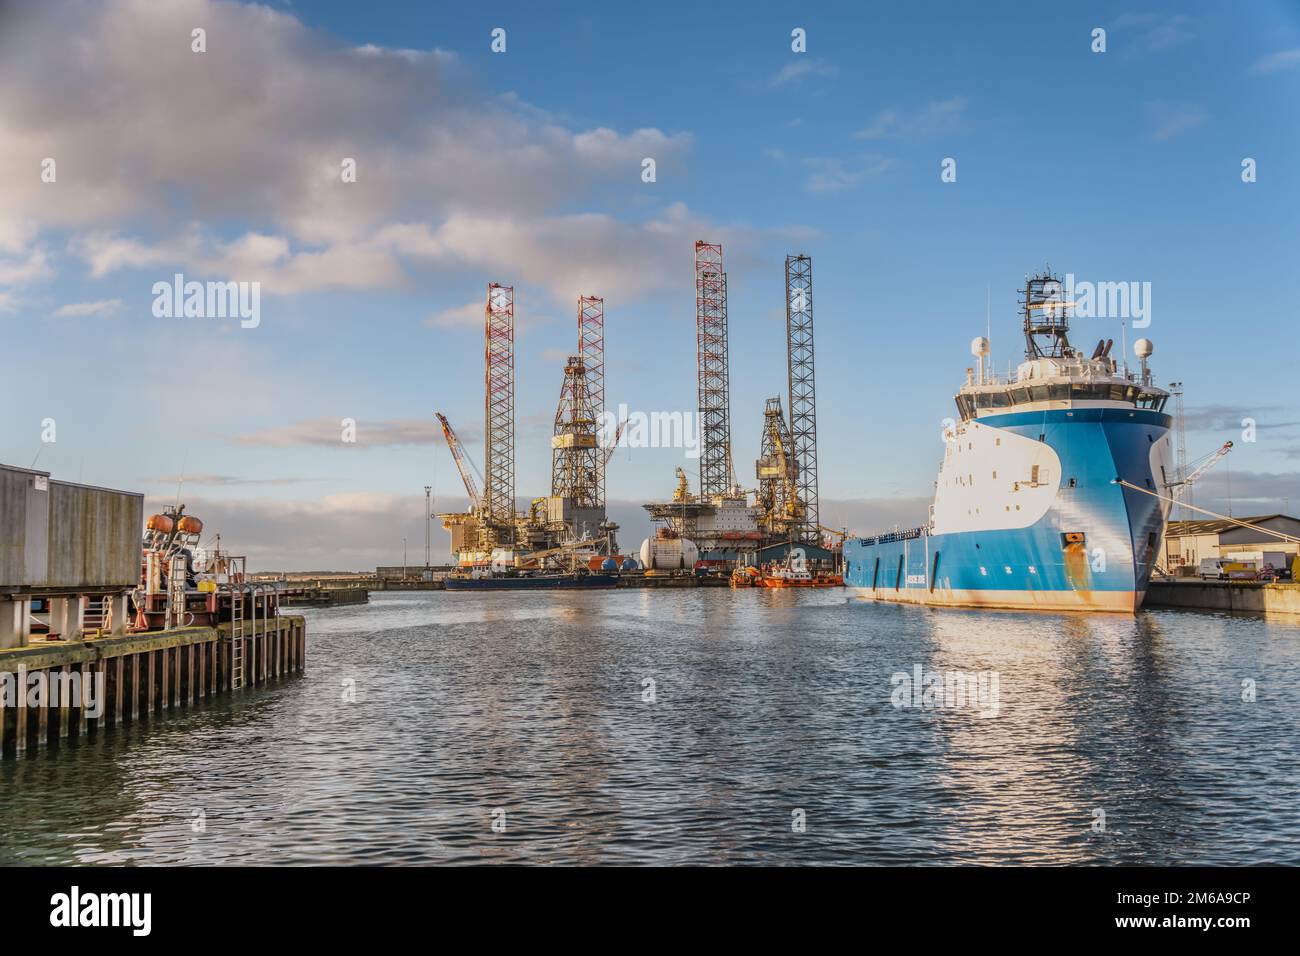 Oil rigs in Esbjerg harbor at the North Sea, Denmark Stock Photo